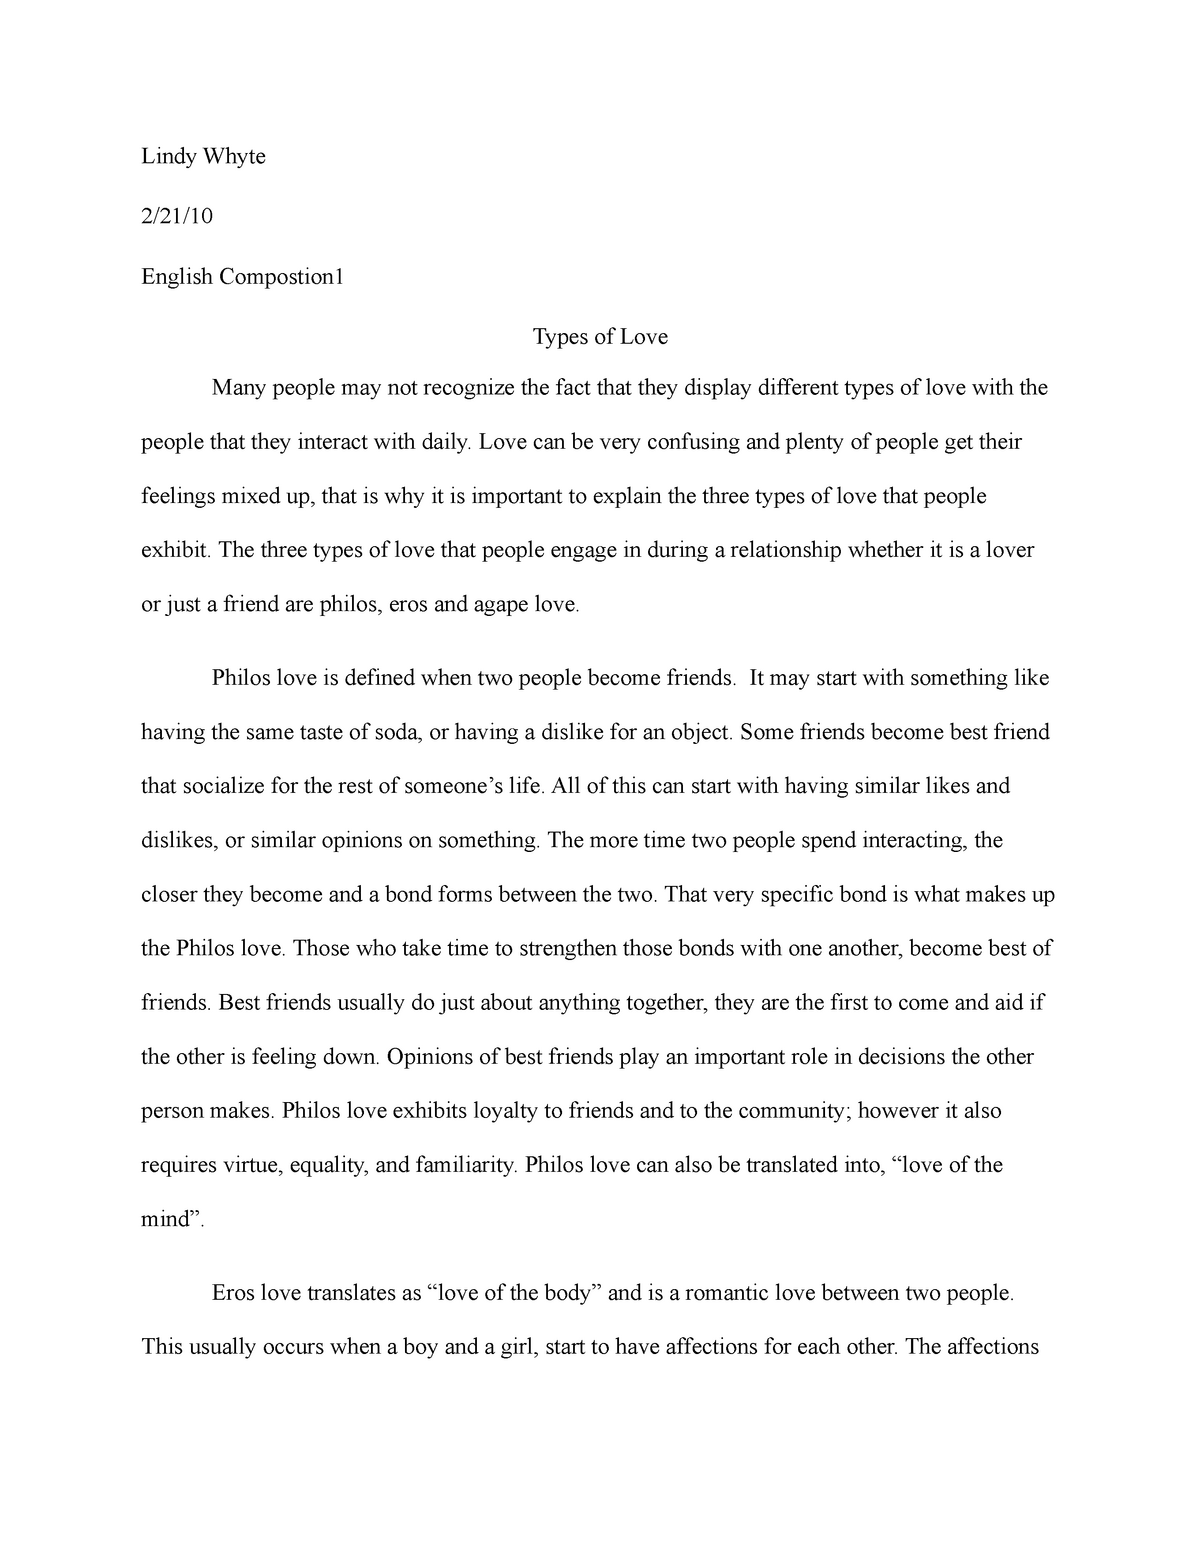 four types of love essay